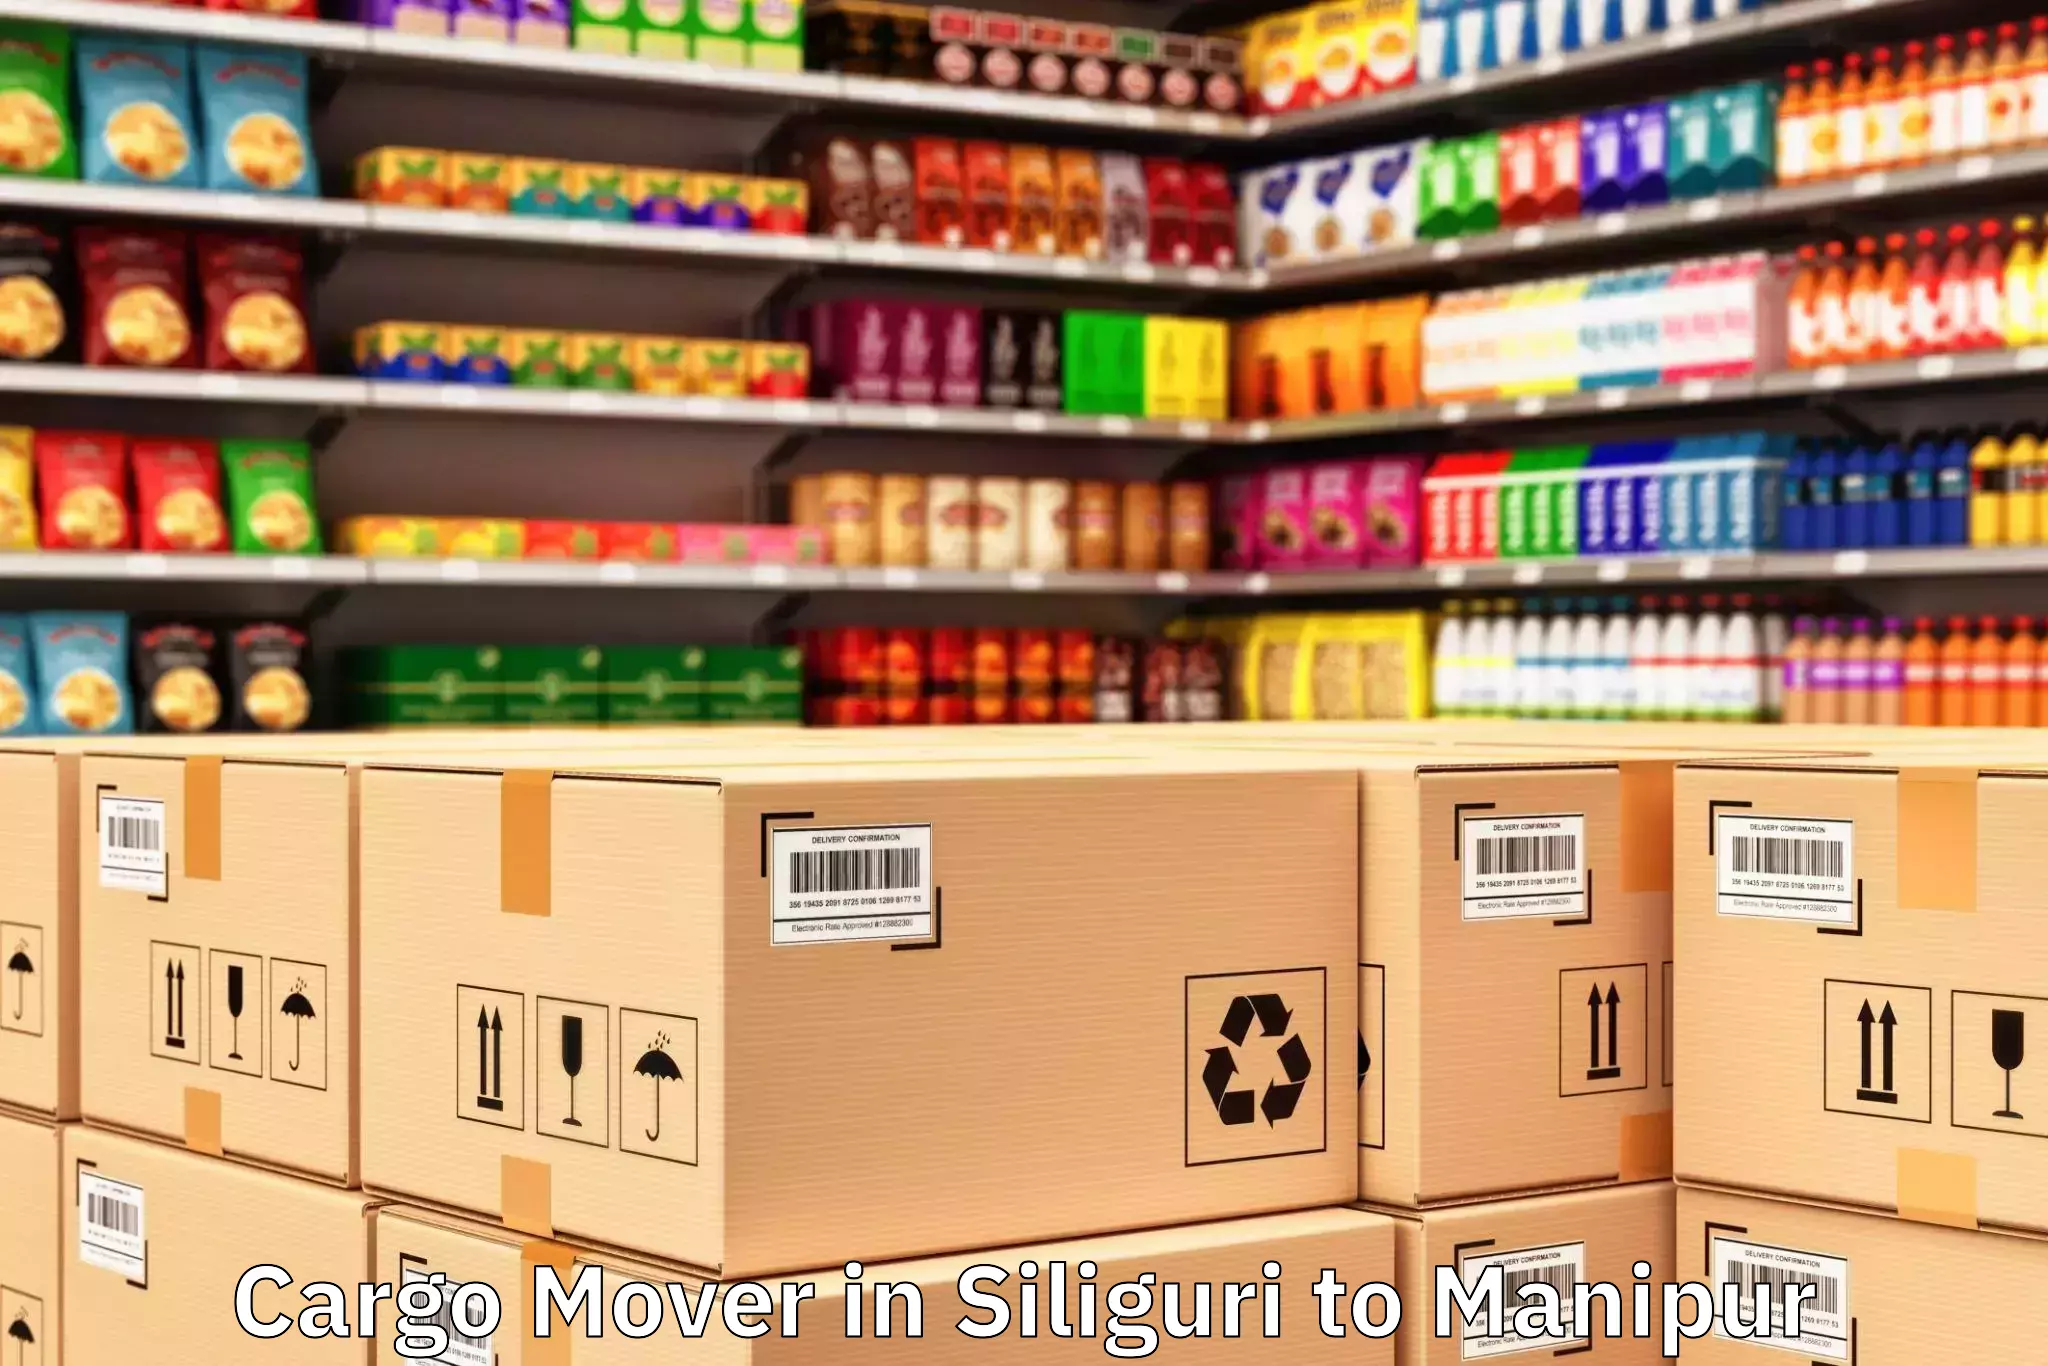 Top Siliguri to Singngat Cargo Mover Available